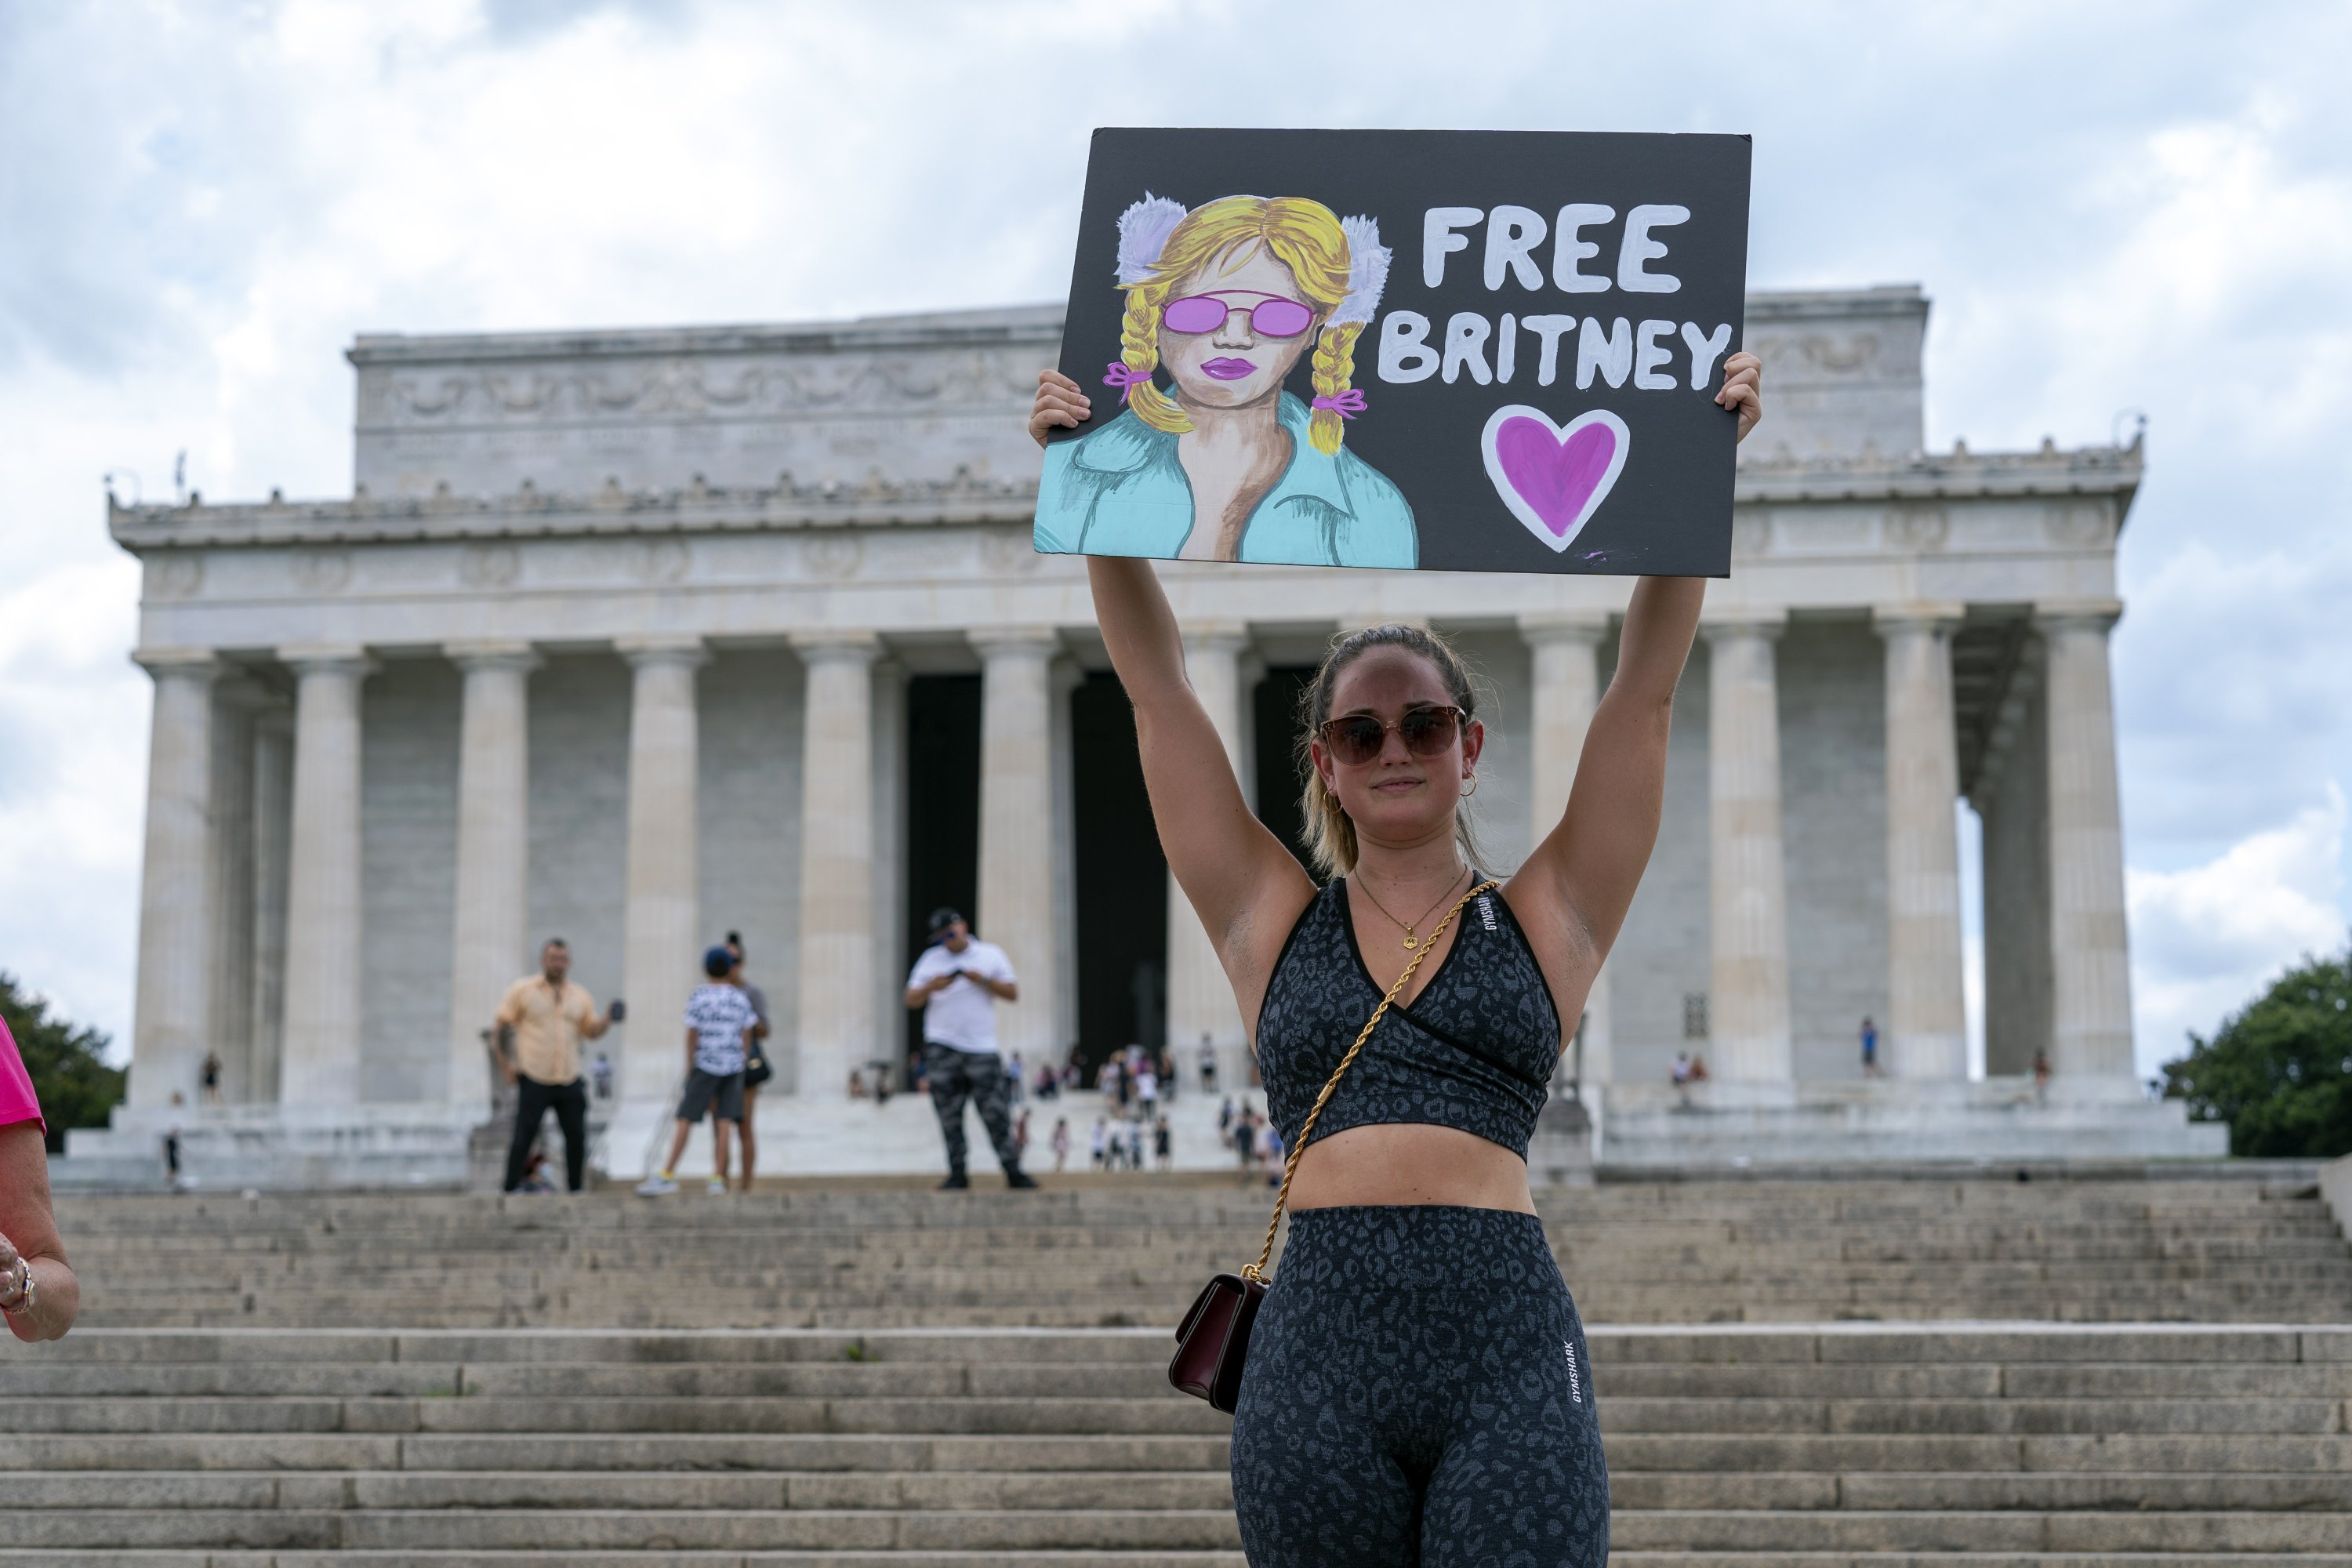 Maggie Howell supporter of pop star Britney Spears protests at the Lincoln Memorial, during the "Free Britney" rally, Washington, U.S., July 14, 2021. (AP Photo)